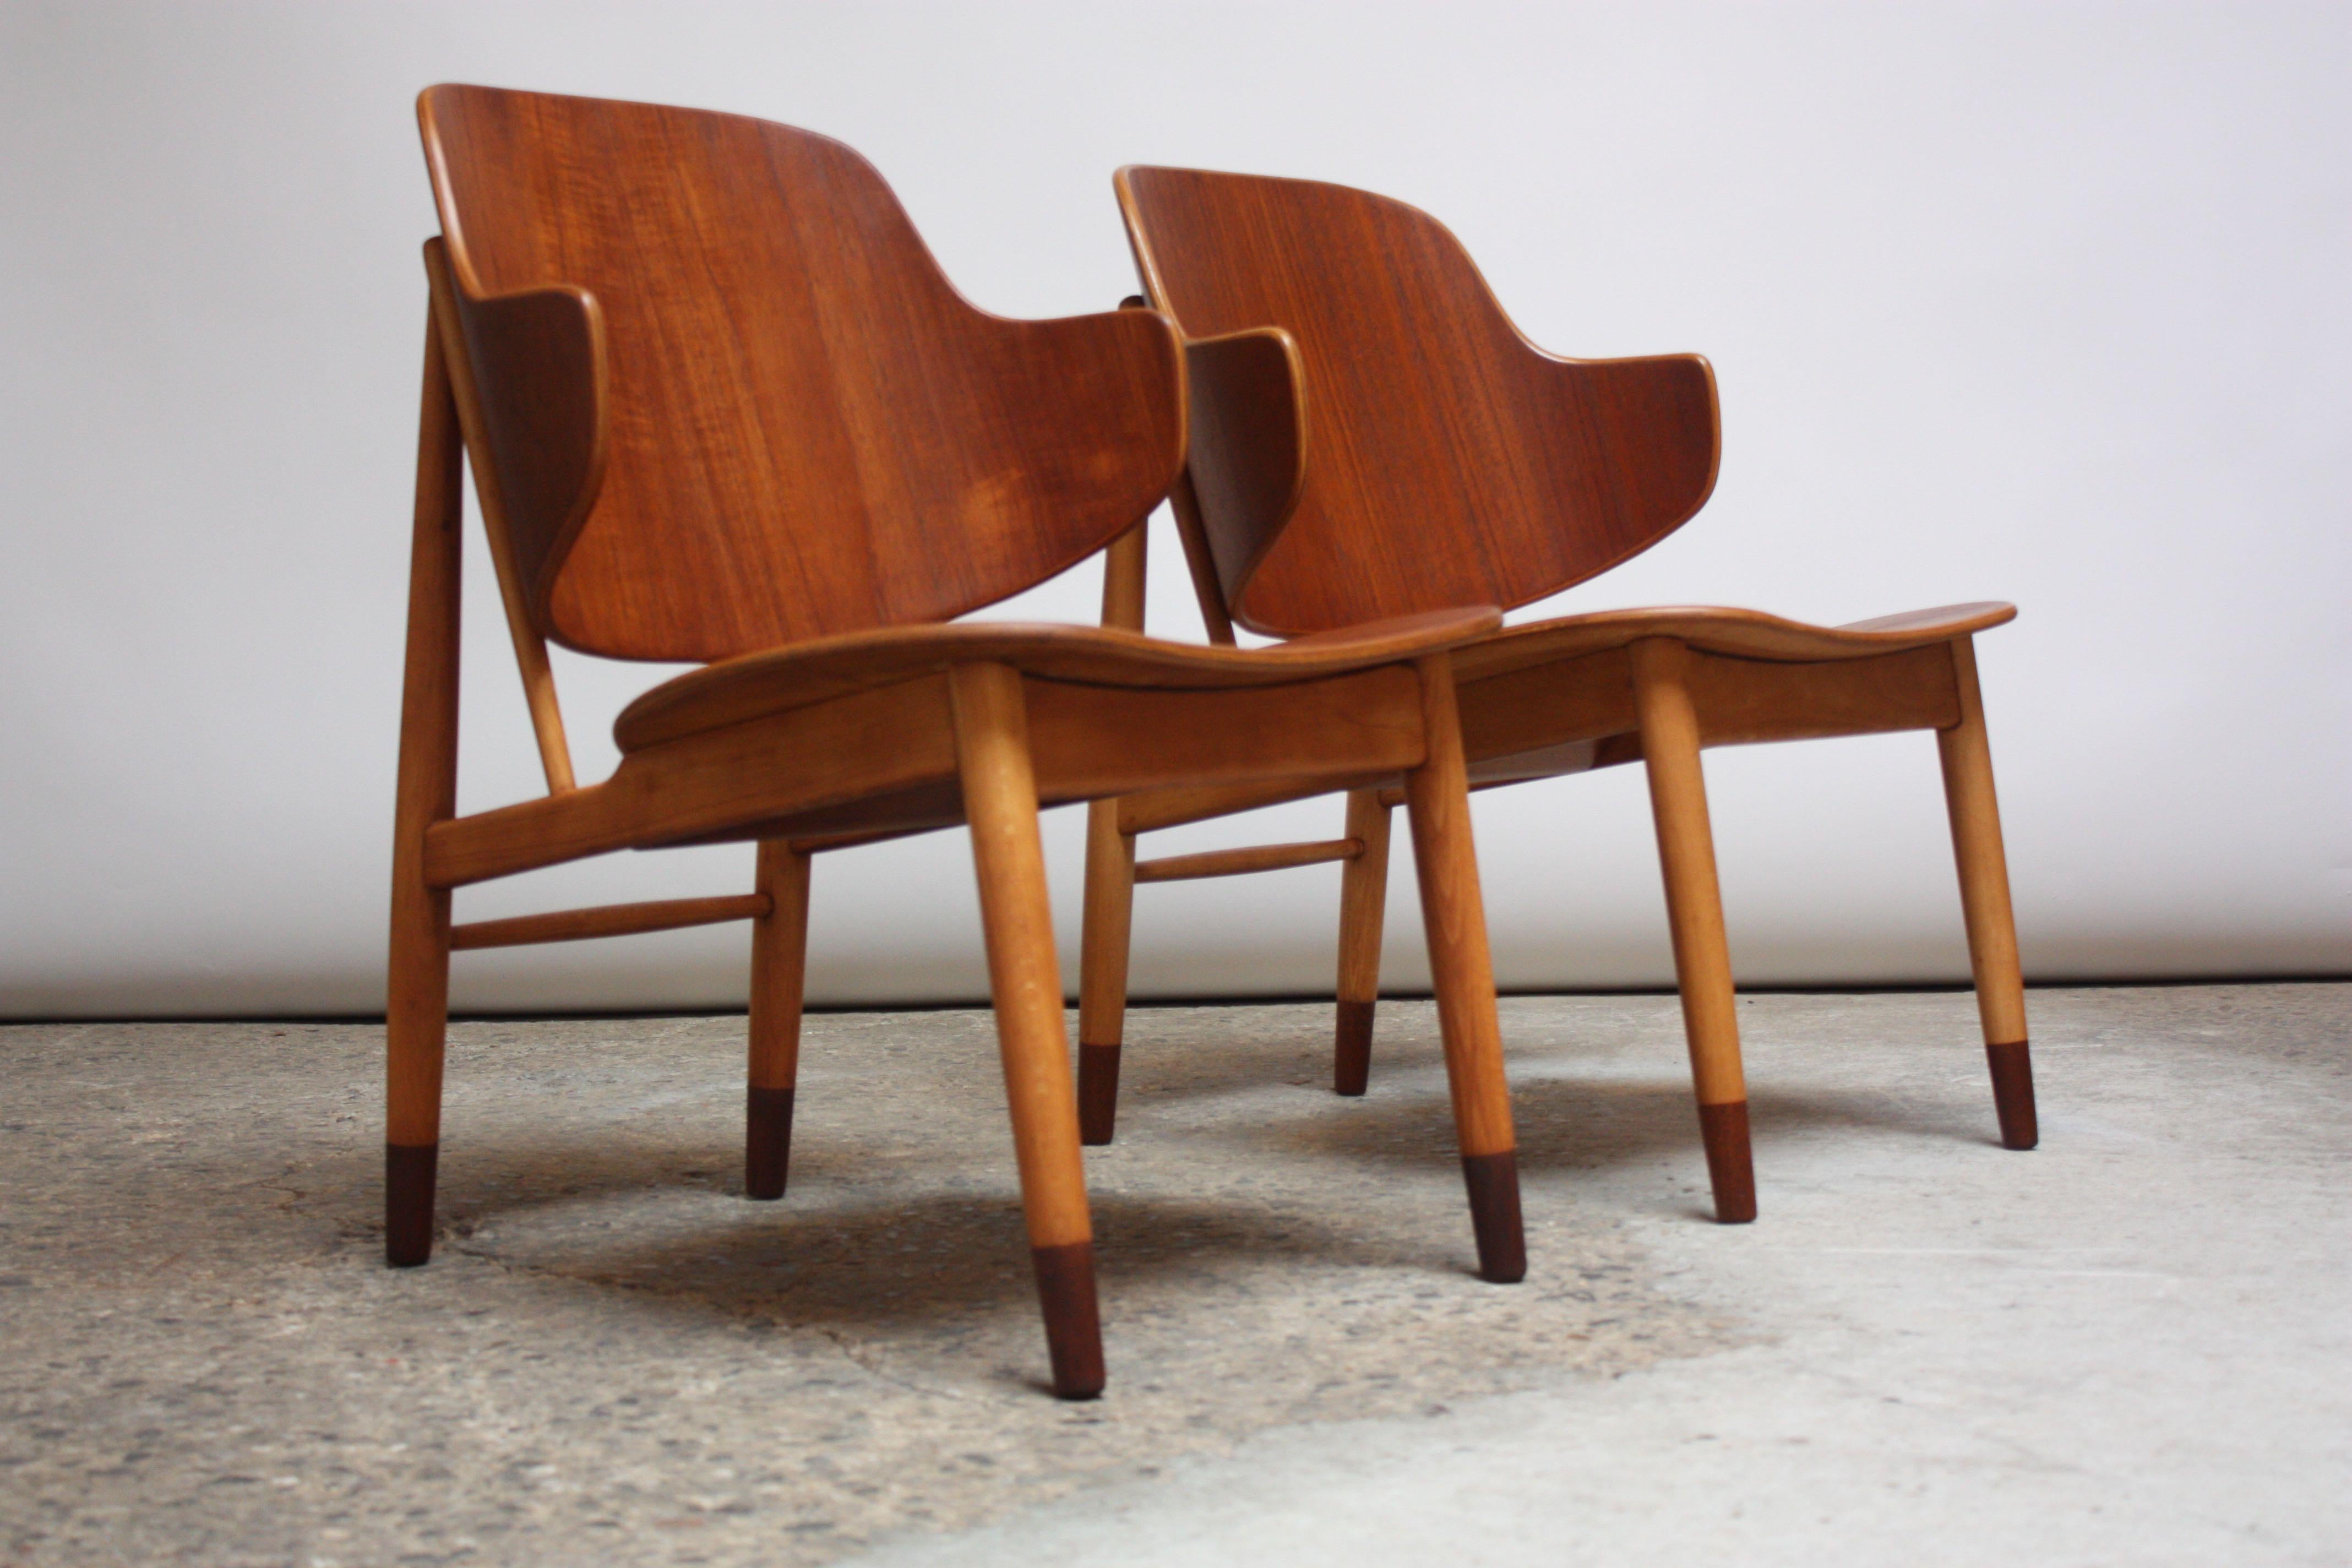 Pair of Danish Sculptural Shell Chairs by Ib Kofod-Larsen in Teak and Beech For Sale 3